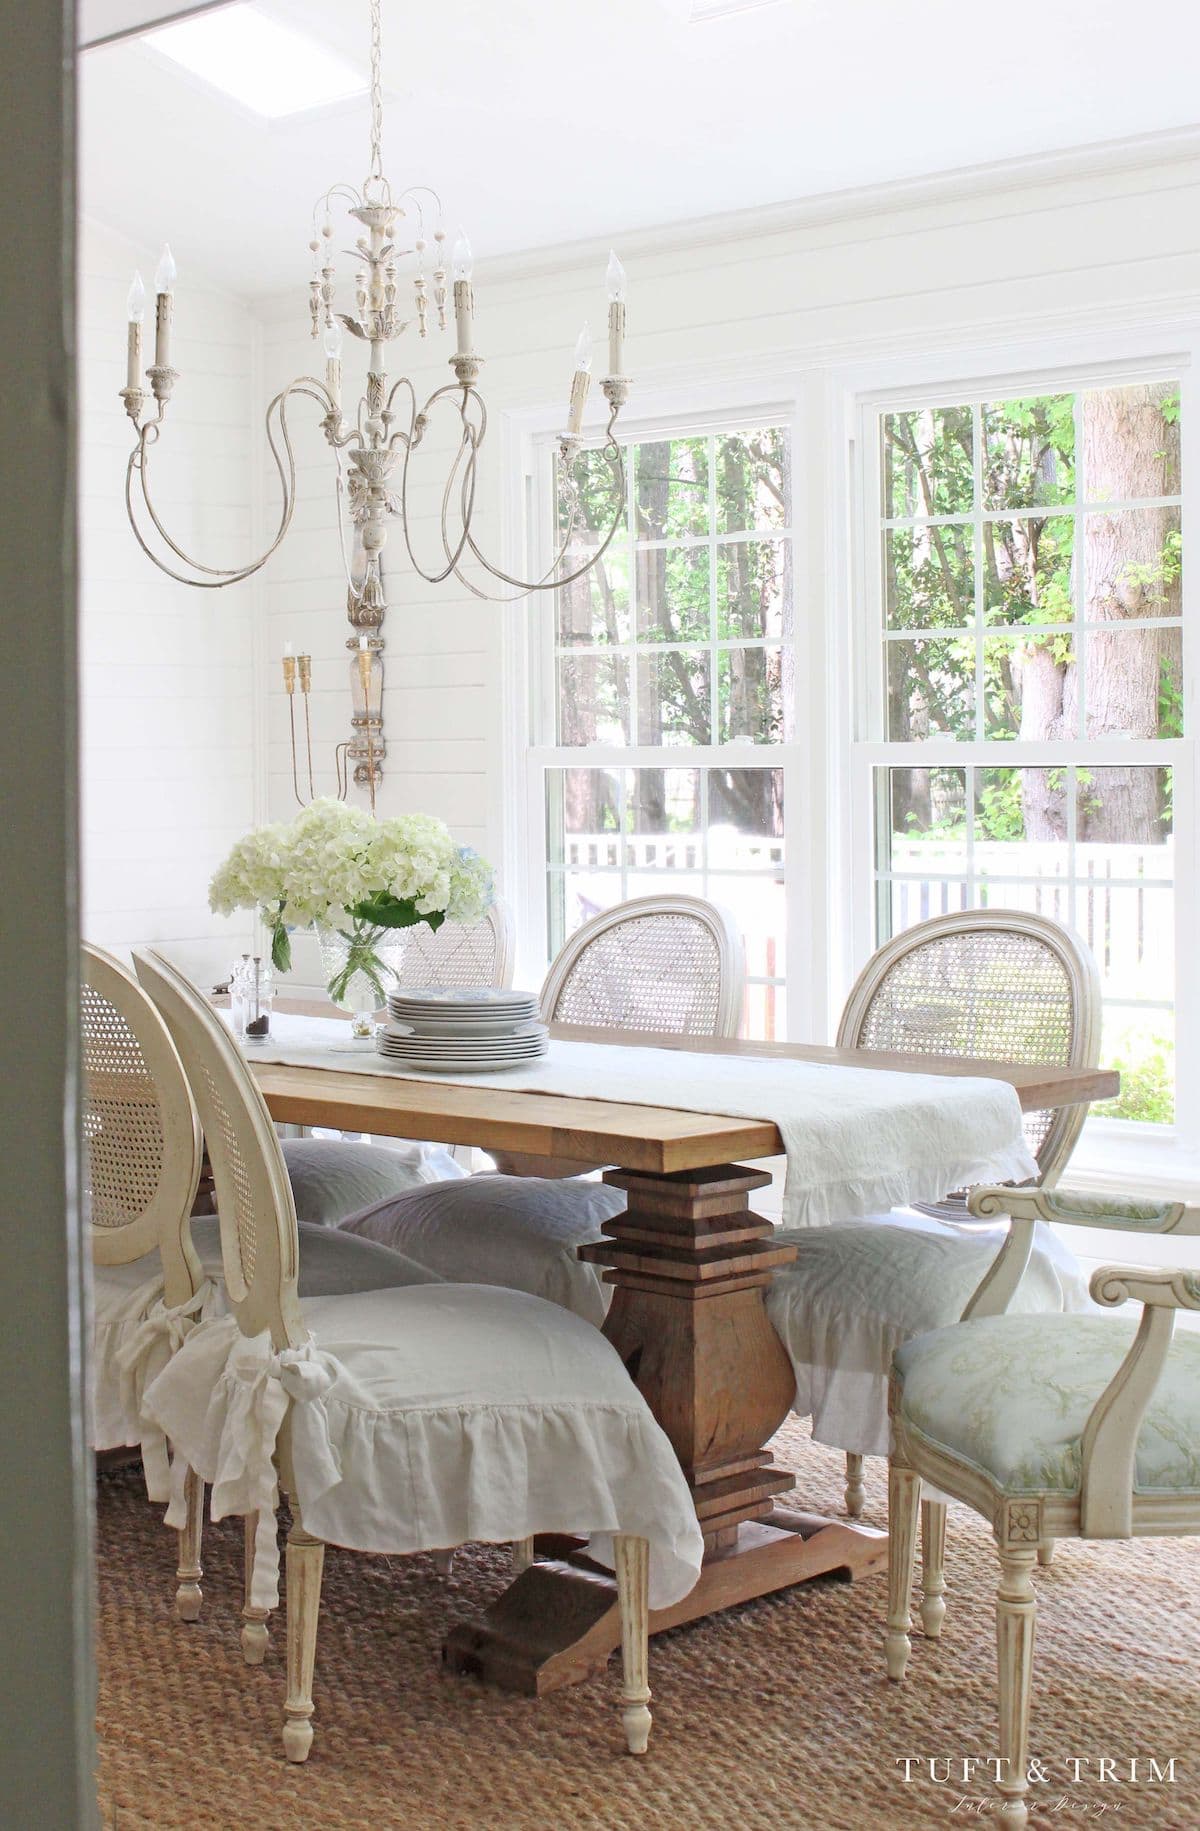 French country style house dining room